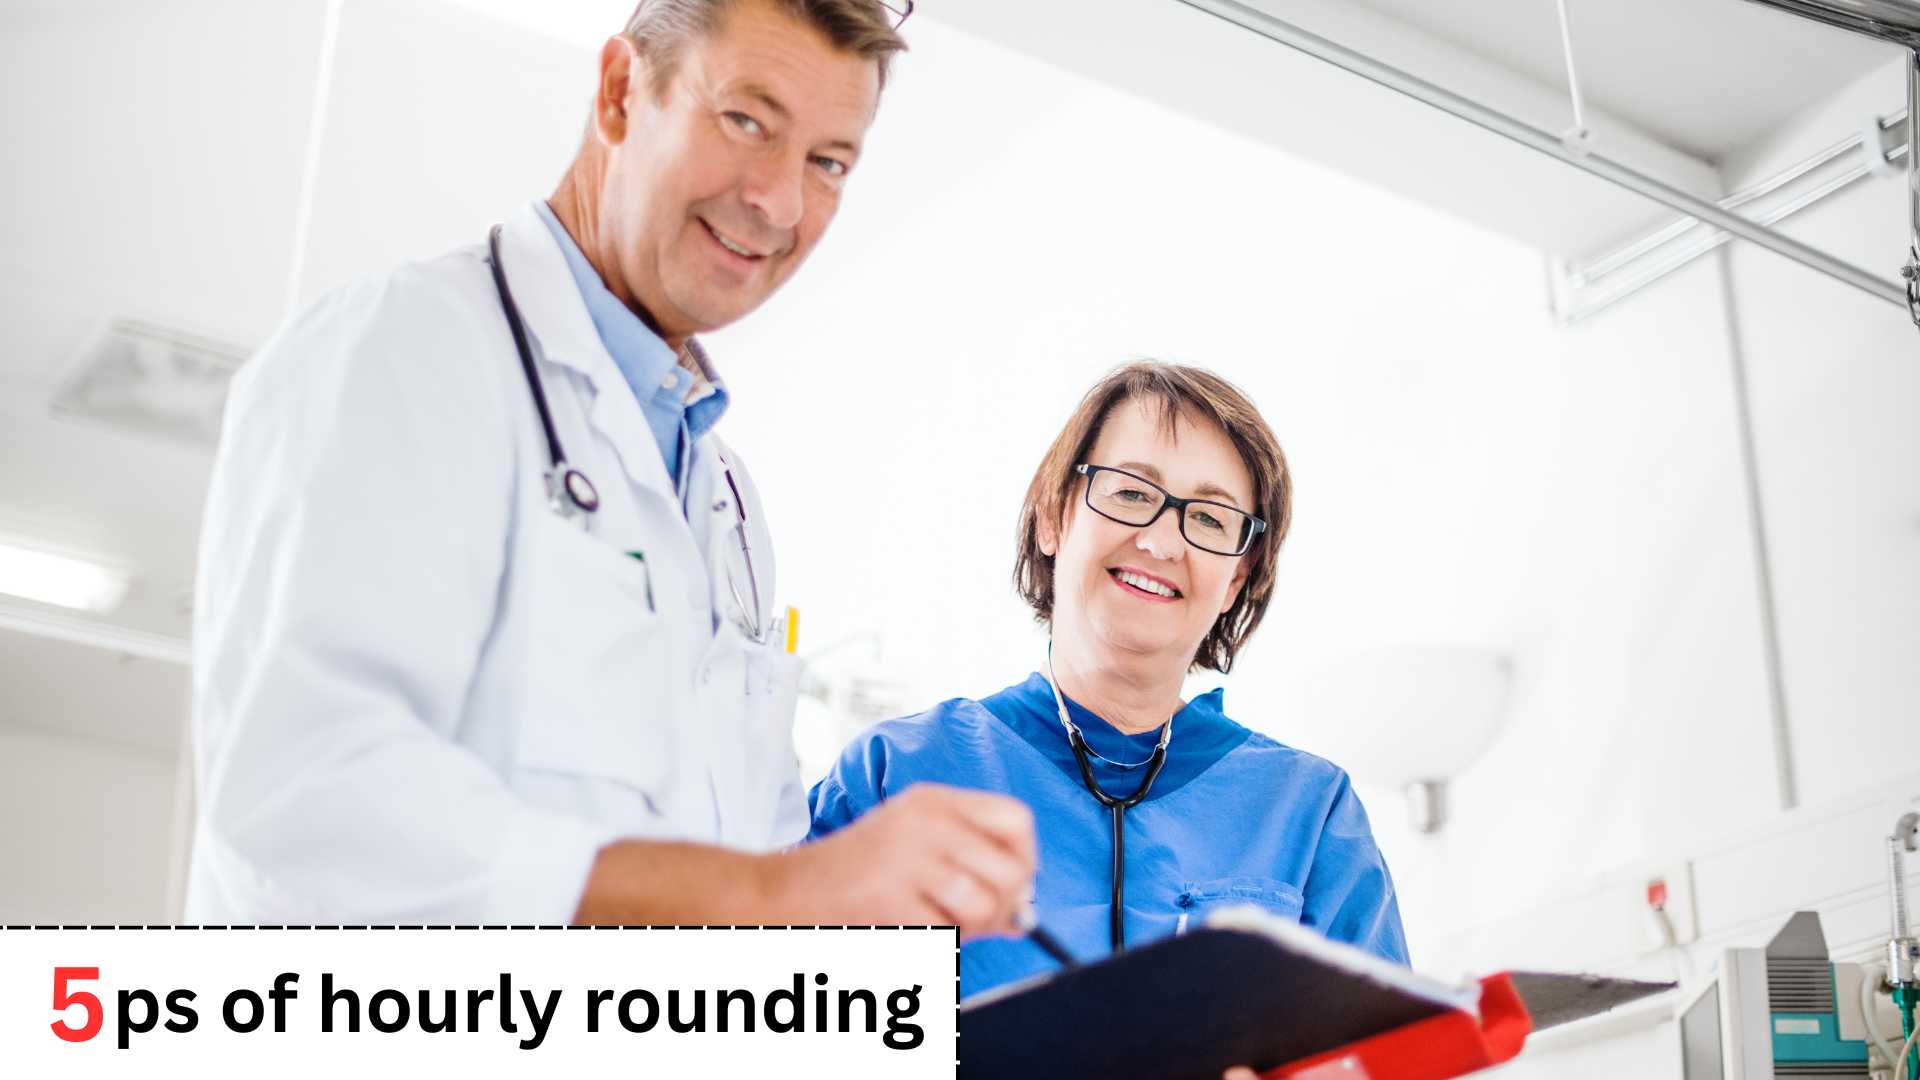 Get to Know the Five Ps of Hourly Rounding for LPNs